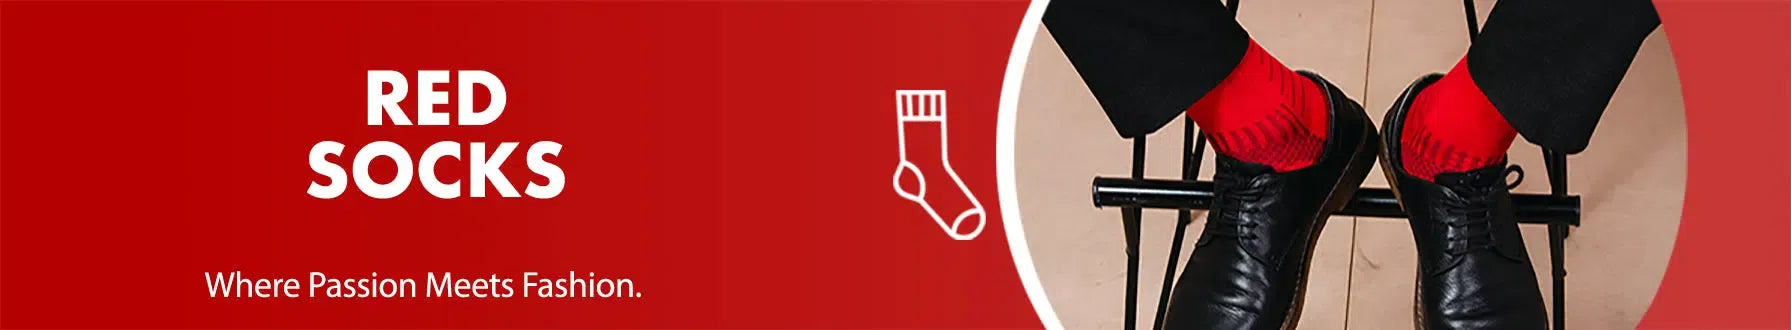 GoWith red socks collection banner desktop